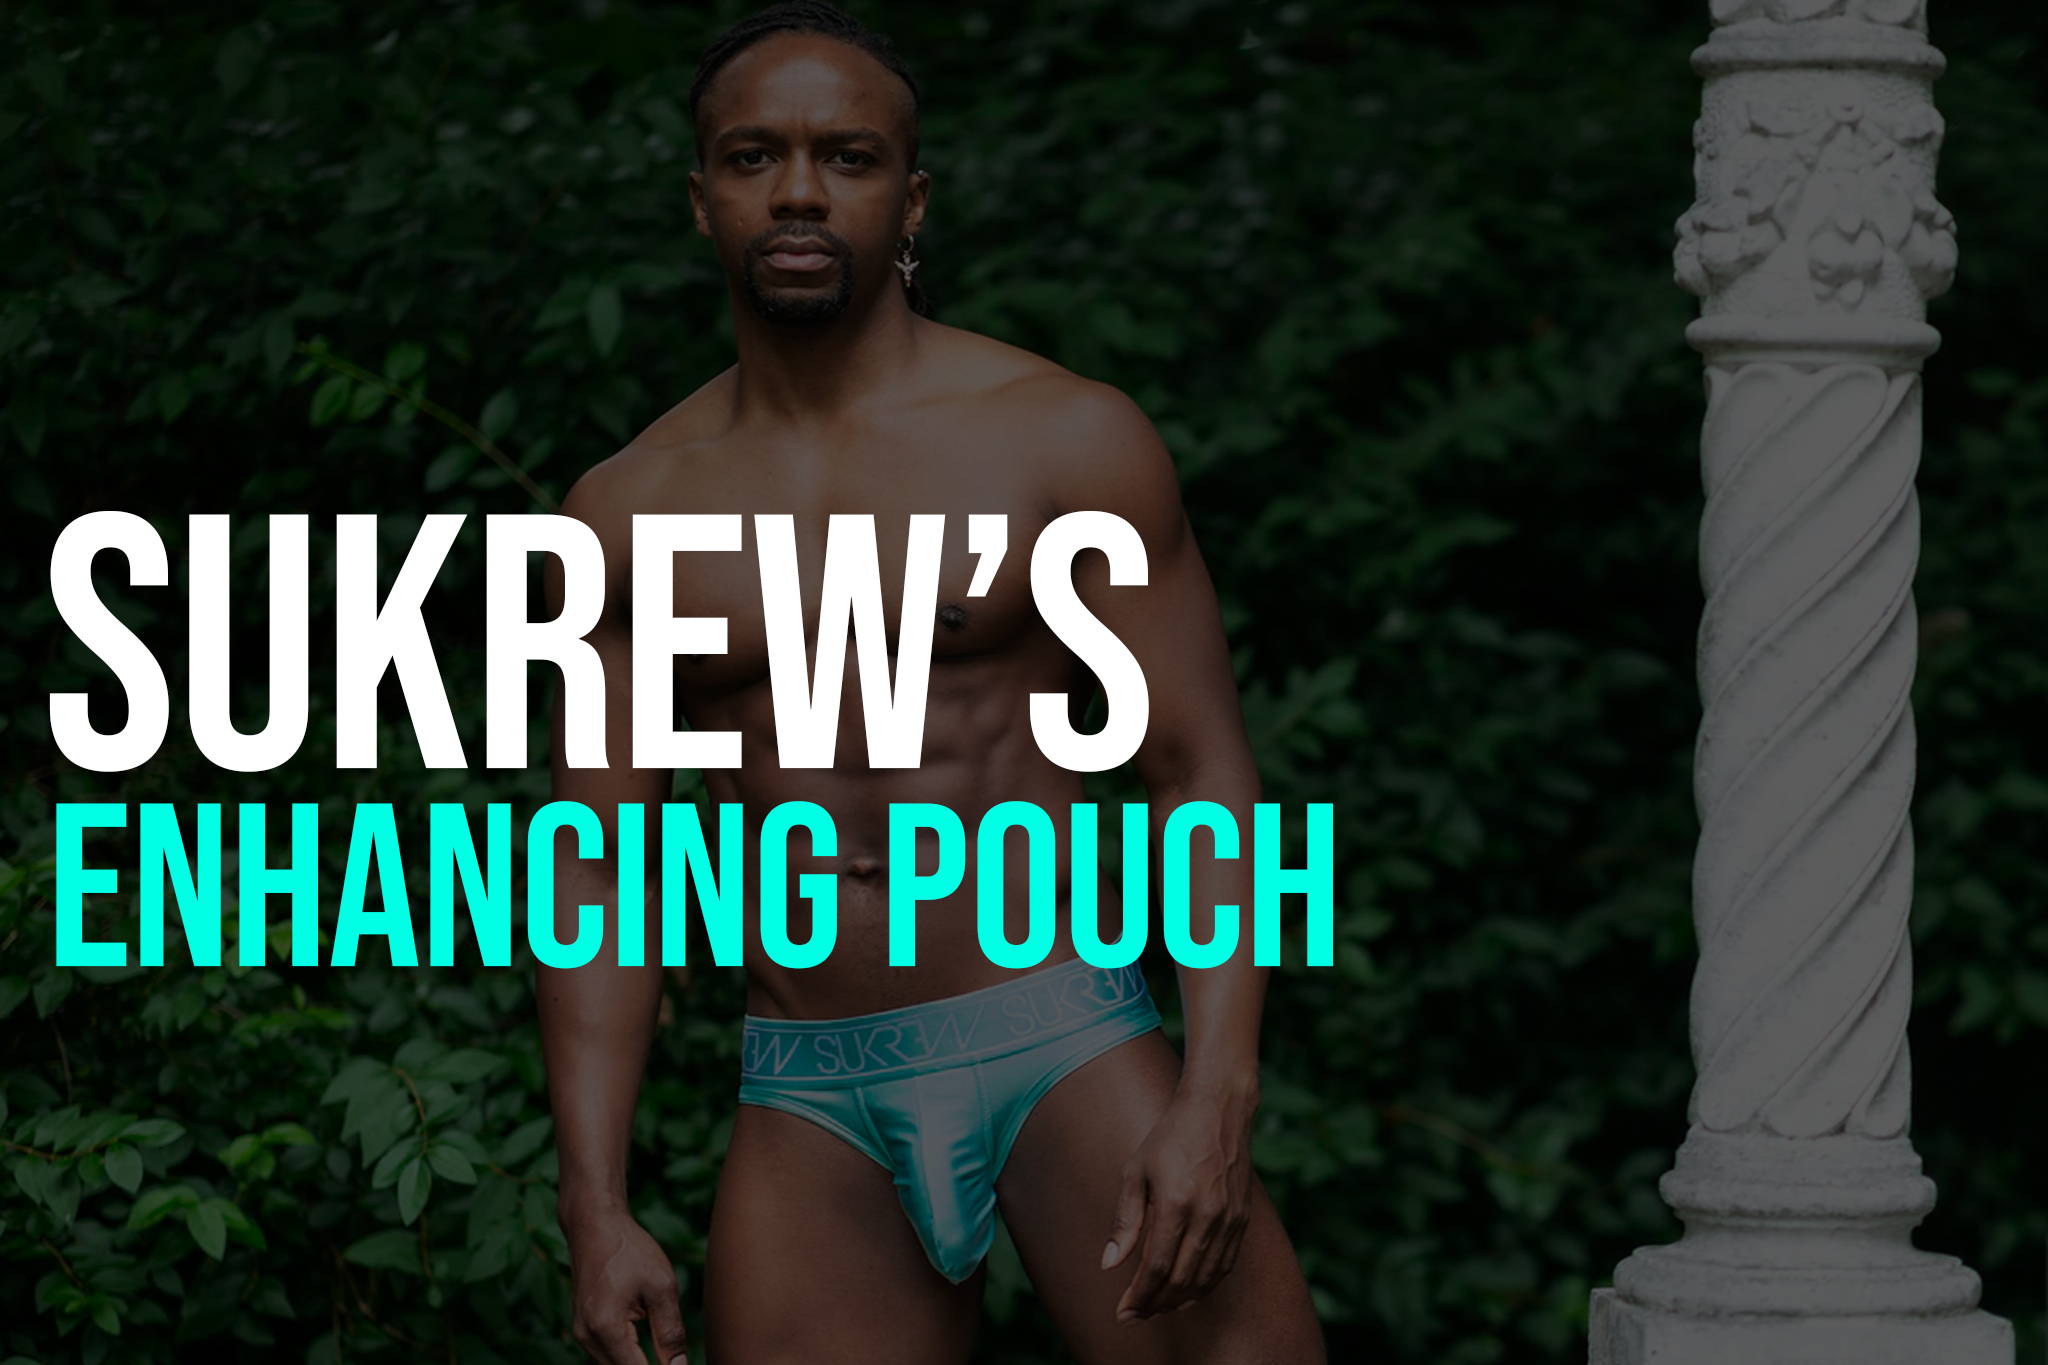 SUKREW's Signature Pouch Is Perfect For Enhancement